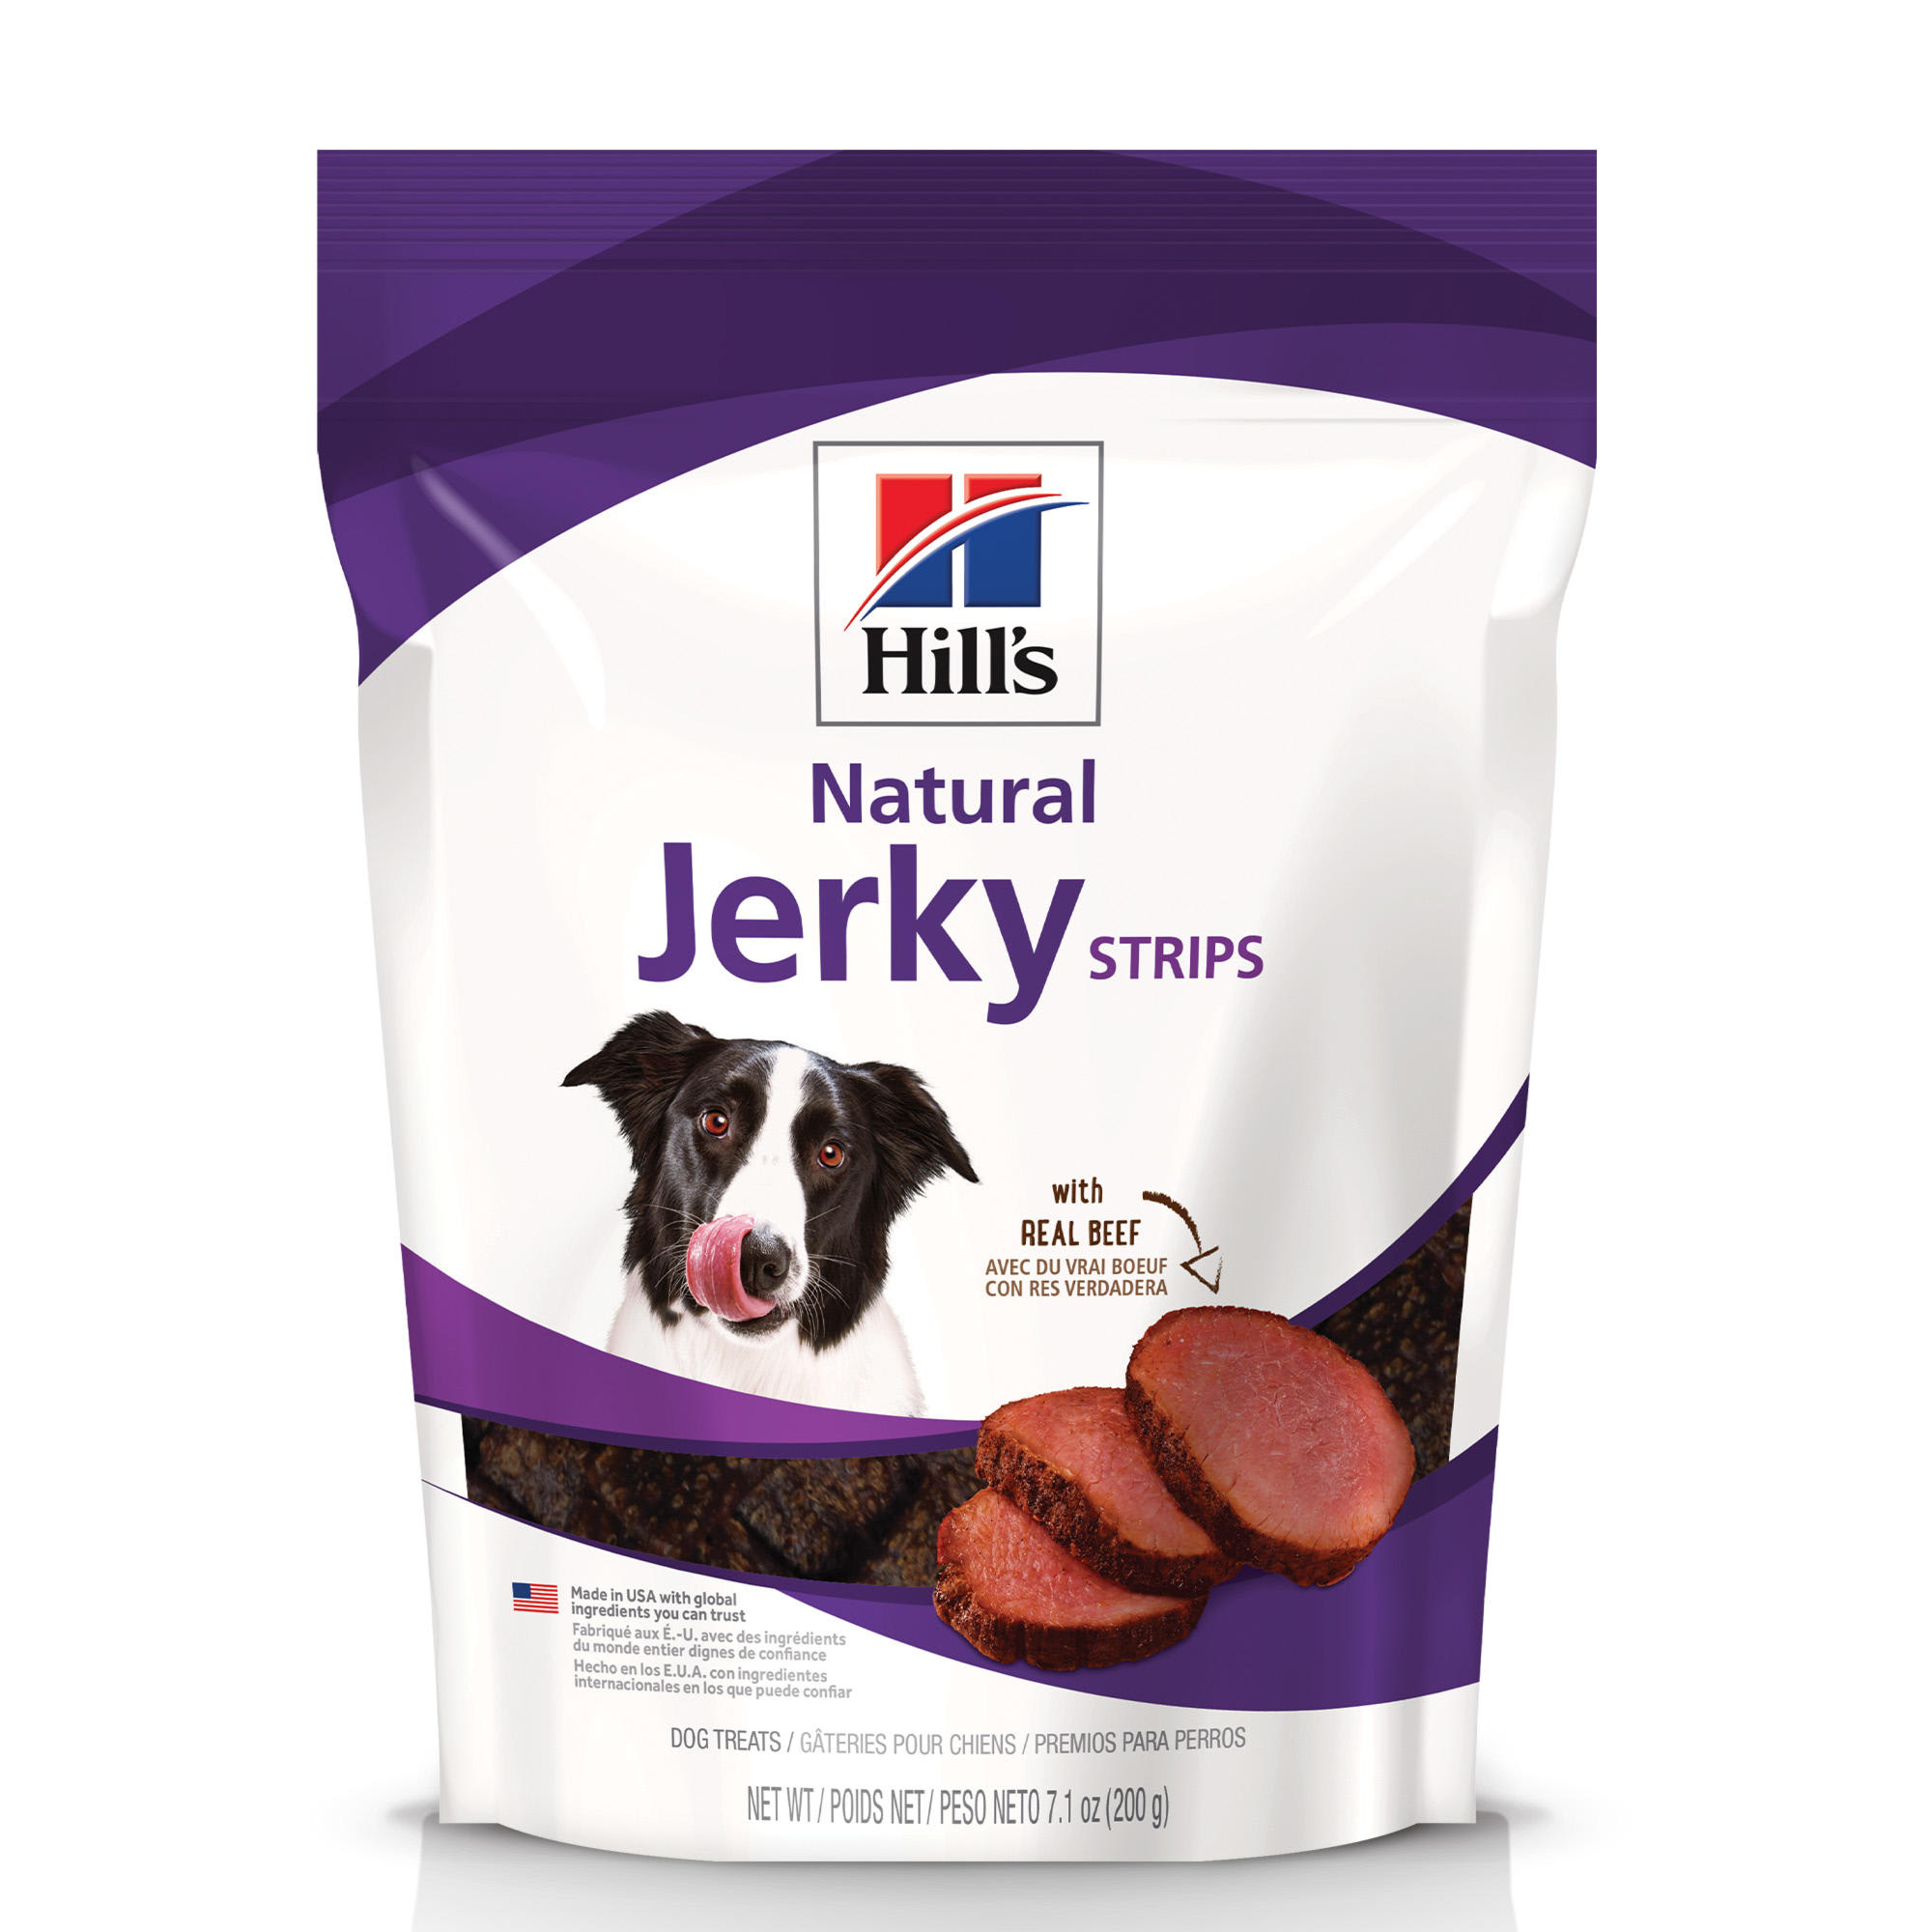 Photos - Dog Food Hills Hill's Hill's Natural Jerky Strips with Real Beef Dog Treat, 7.1 oz., Bag 